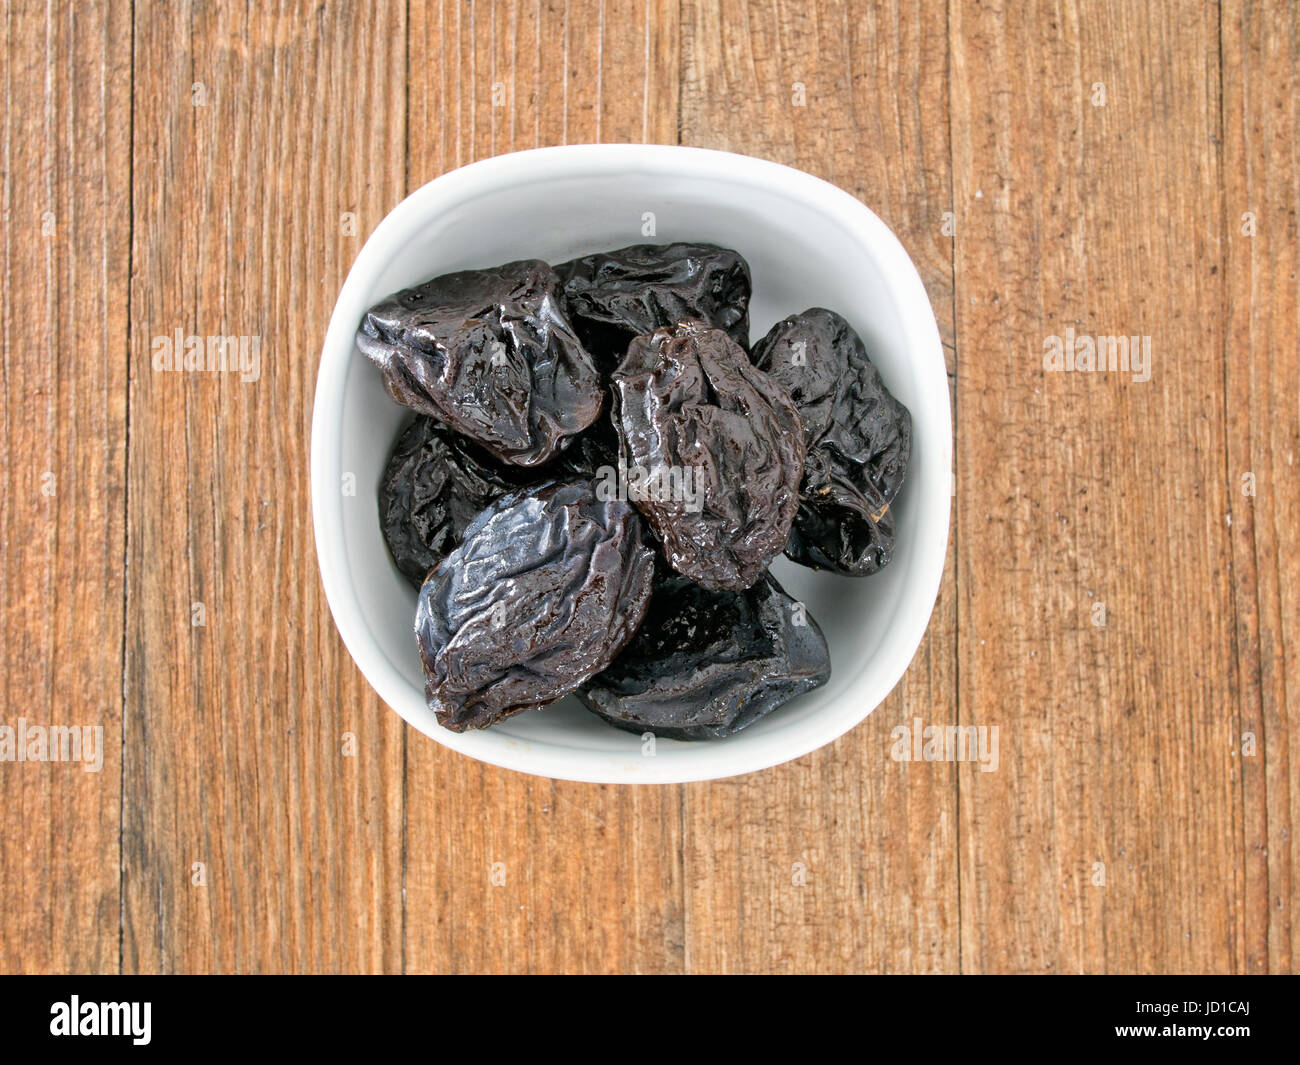 Portin of prunes. Dried plums. High in roughage, iron and boron. Stock Photo